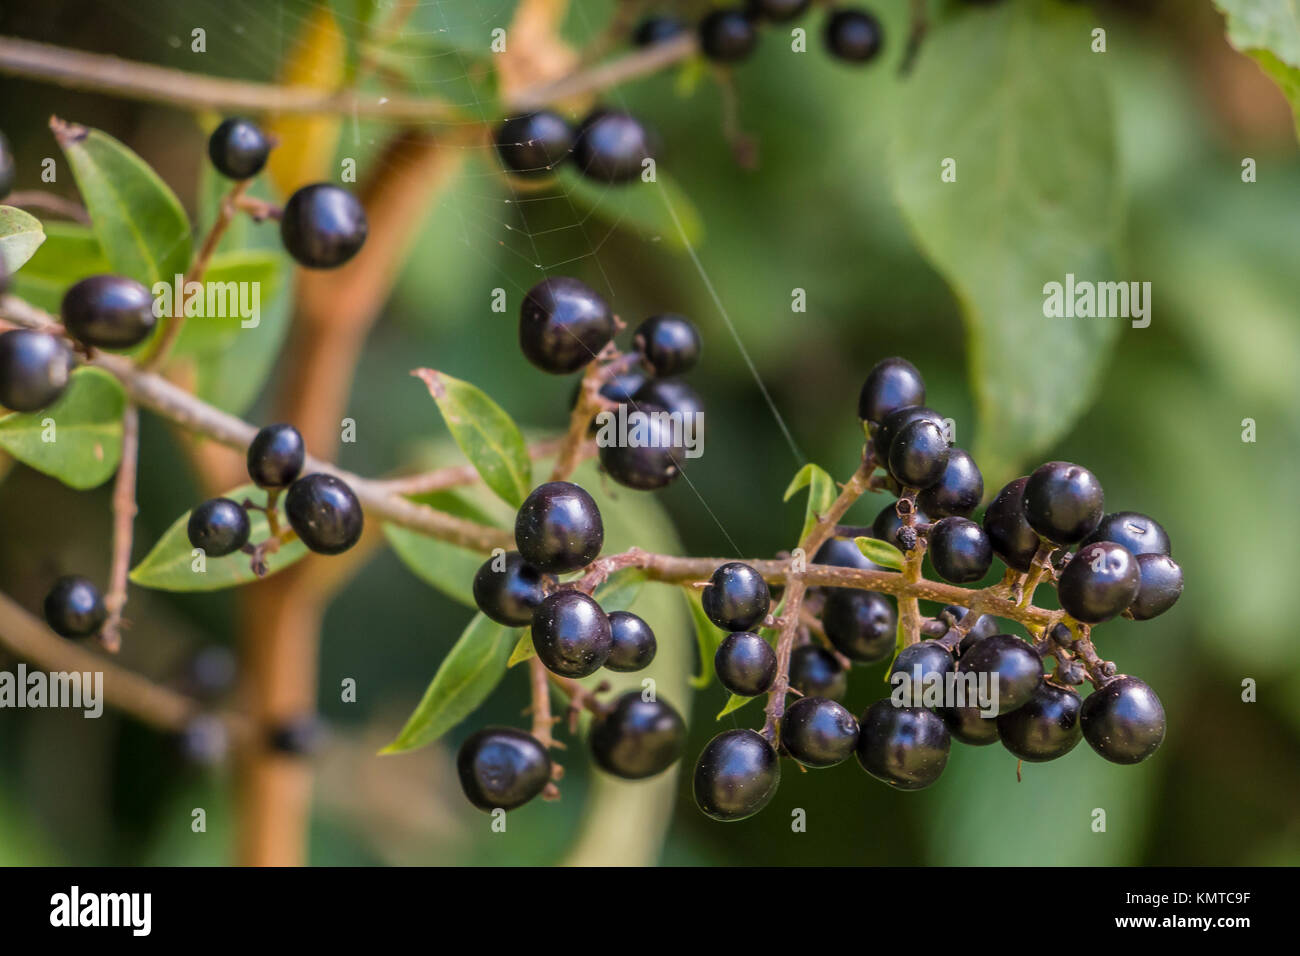 Black berries and green leaves on a bush in the garden Stock Photo